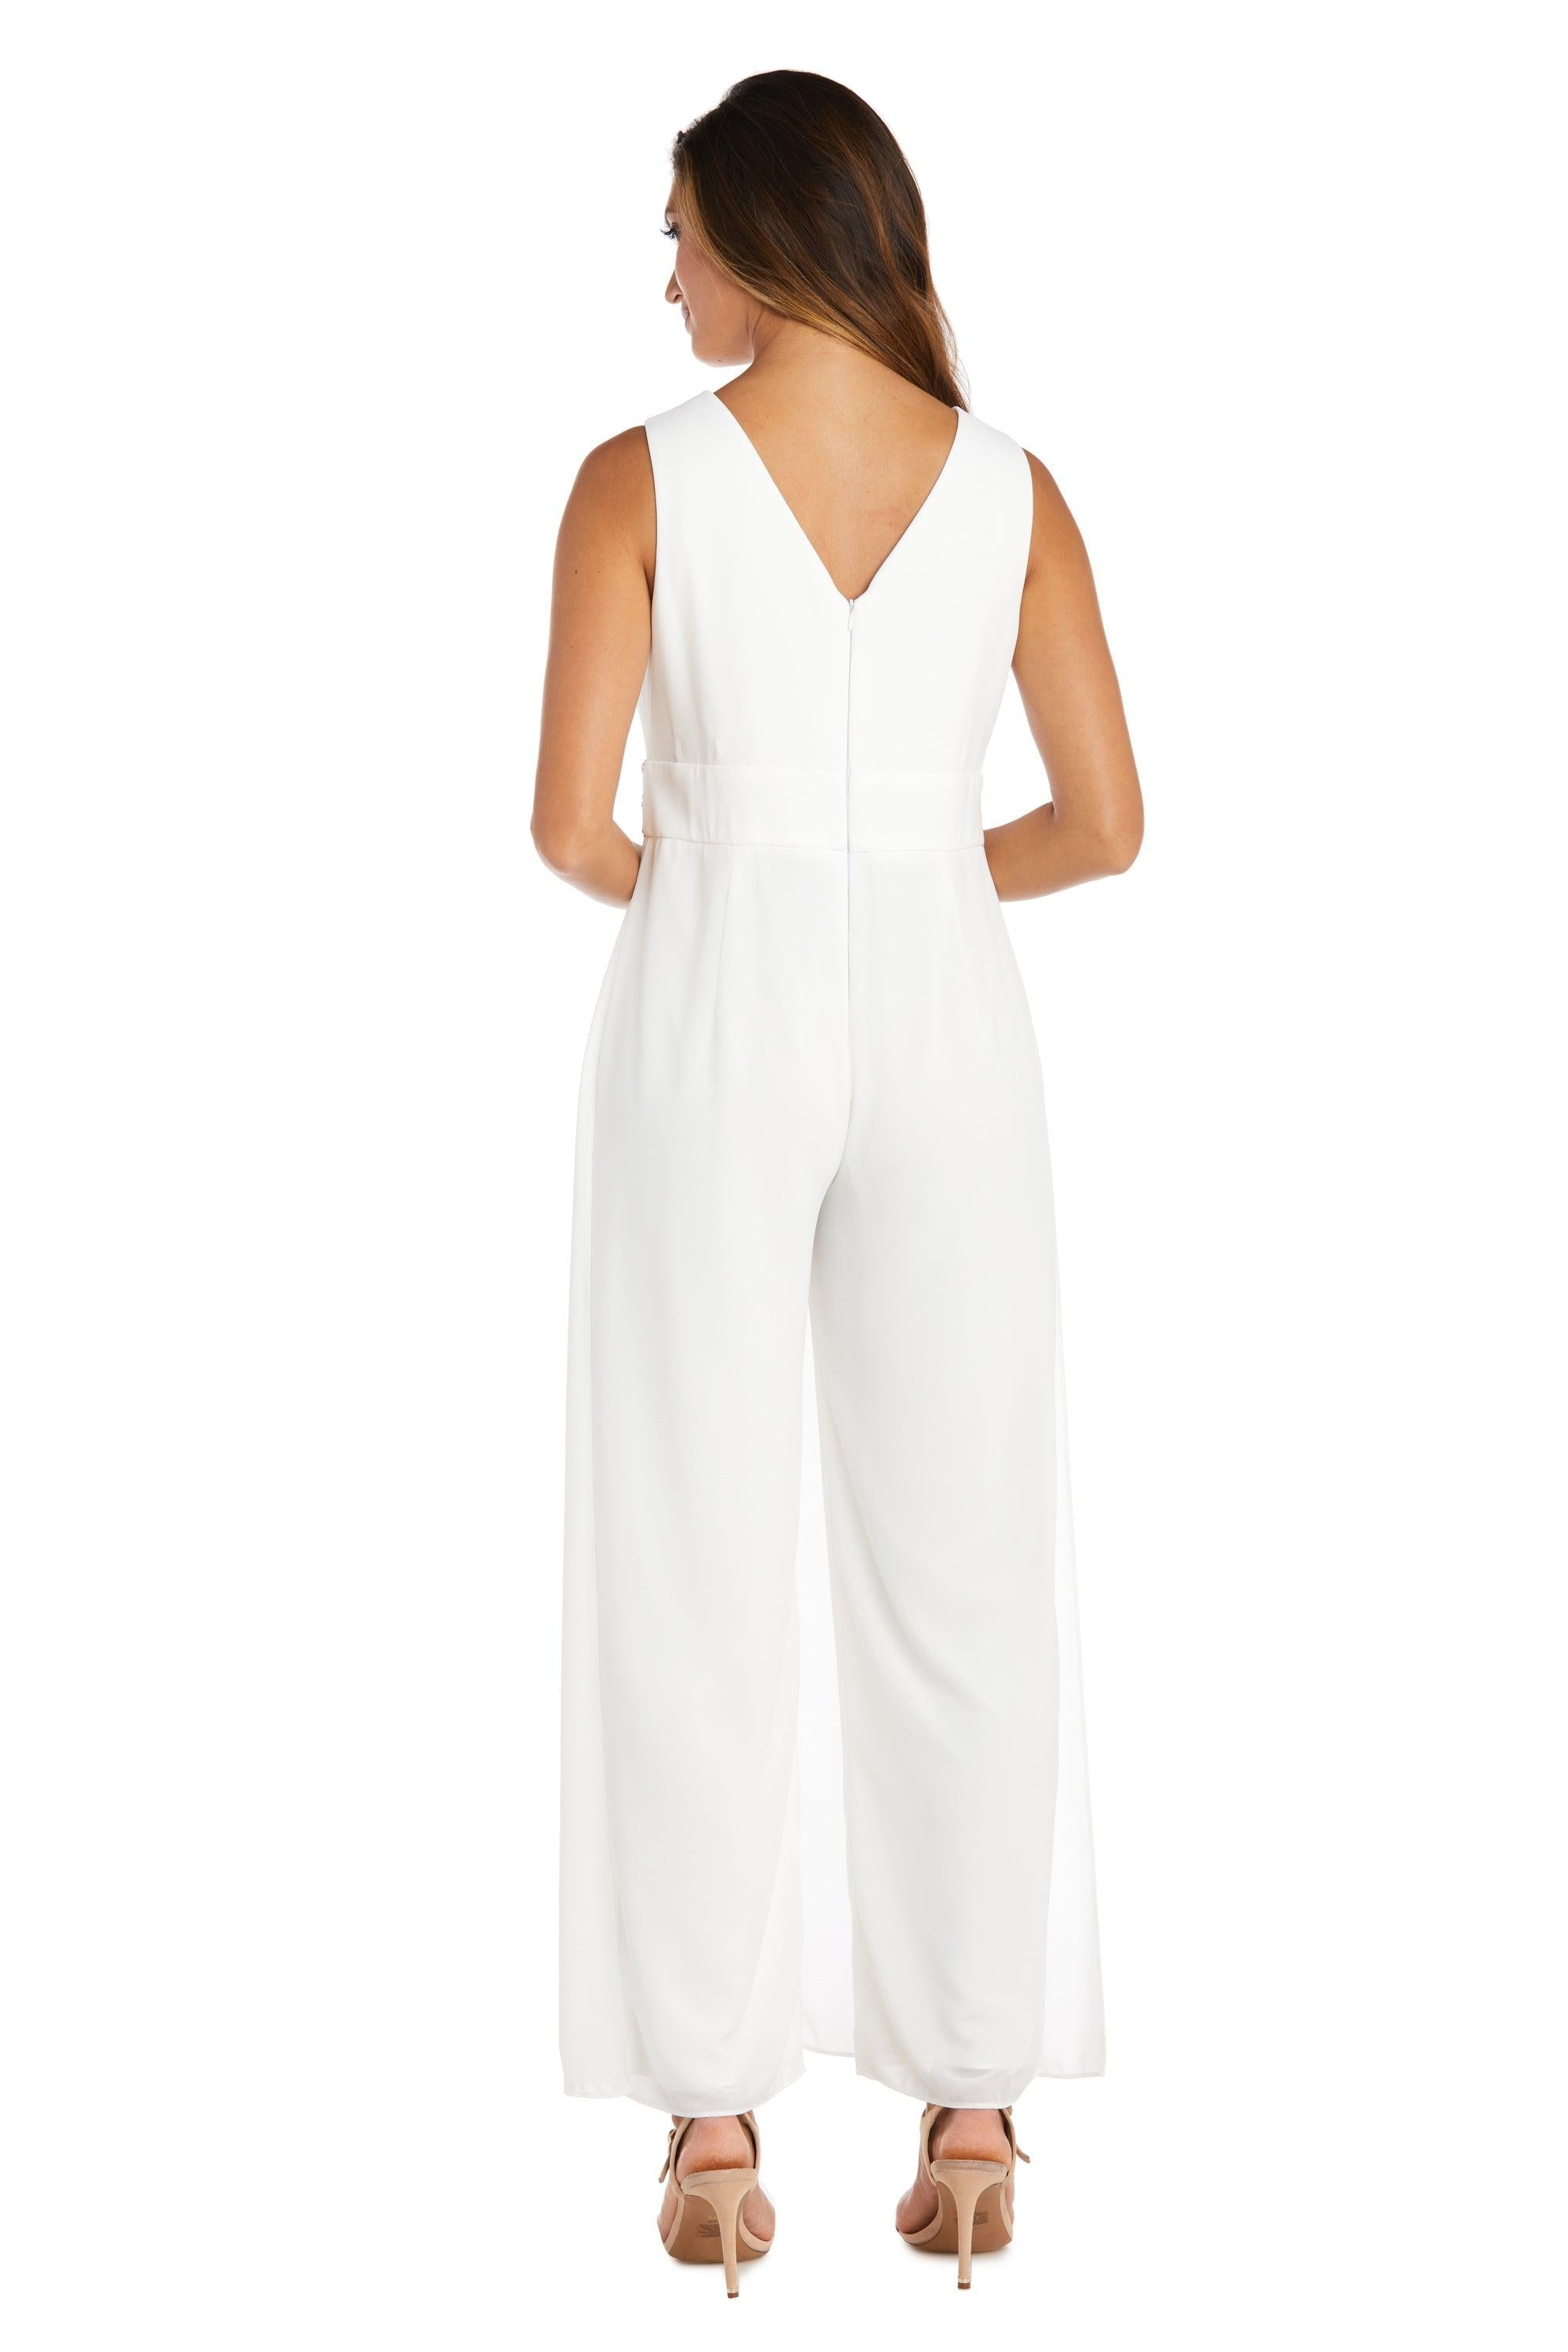 R&M Richards Long Sleeveless Formal Jumpsuit 9365 - The Dress Outlet